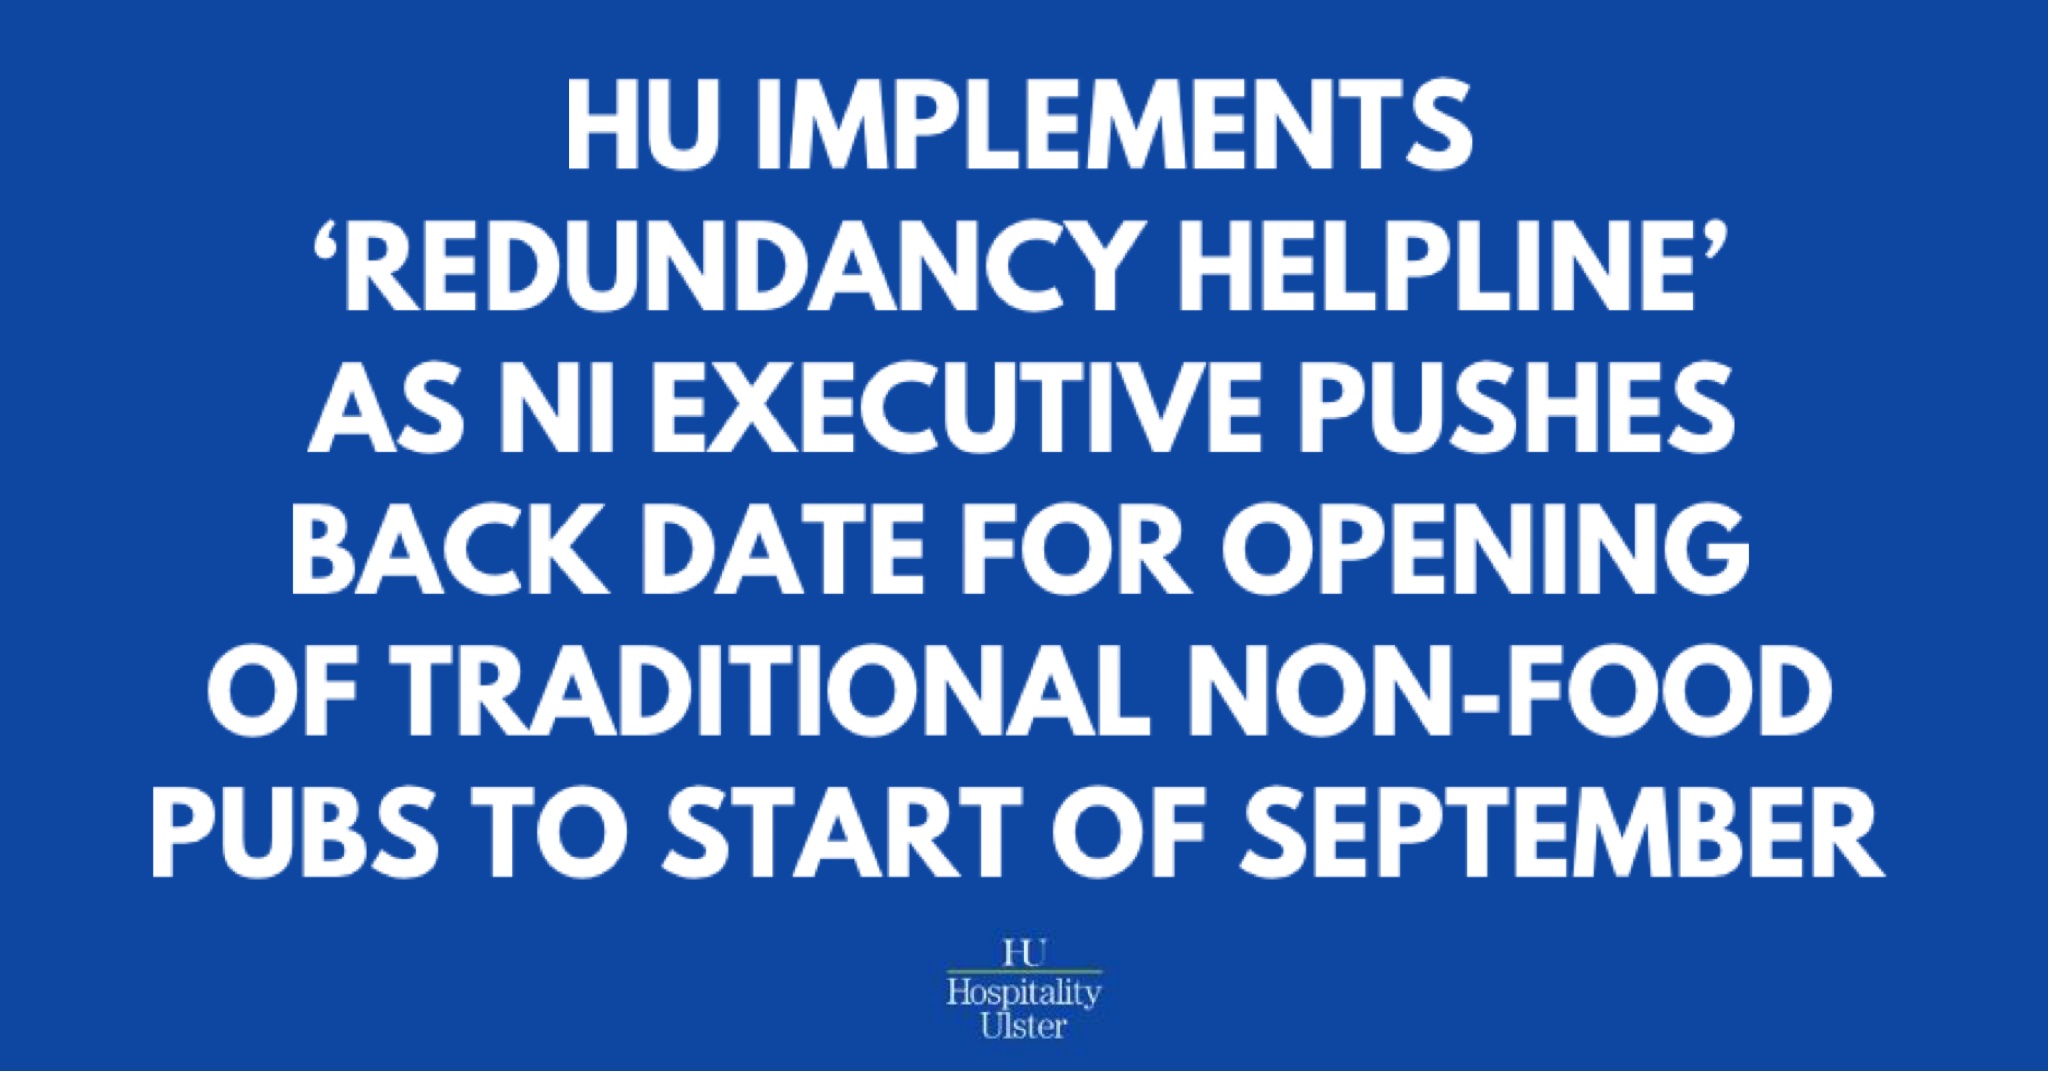 HU IMPLEMENTS REDUNDANCY HELPLINE AS NI EXEC PUSHES DATE FOR OPENING OF NON FOOD PUBS TO 1 SEPTEMBER